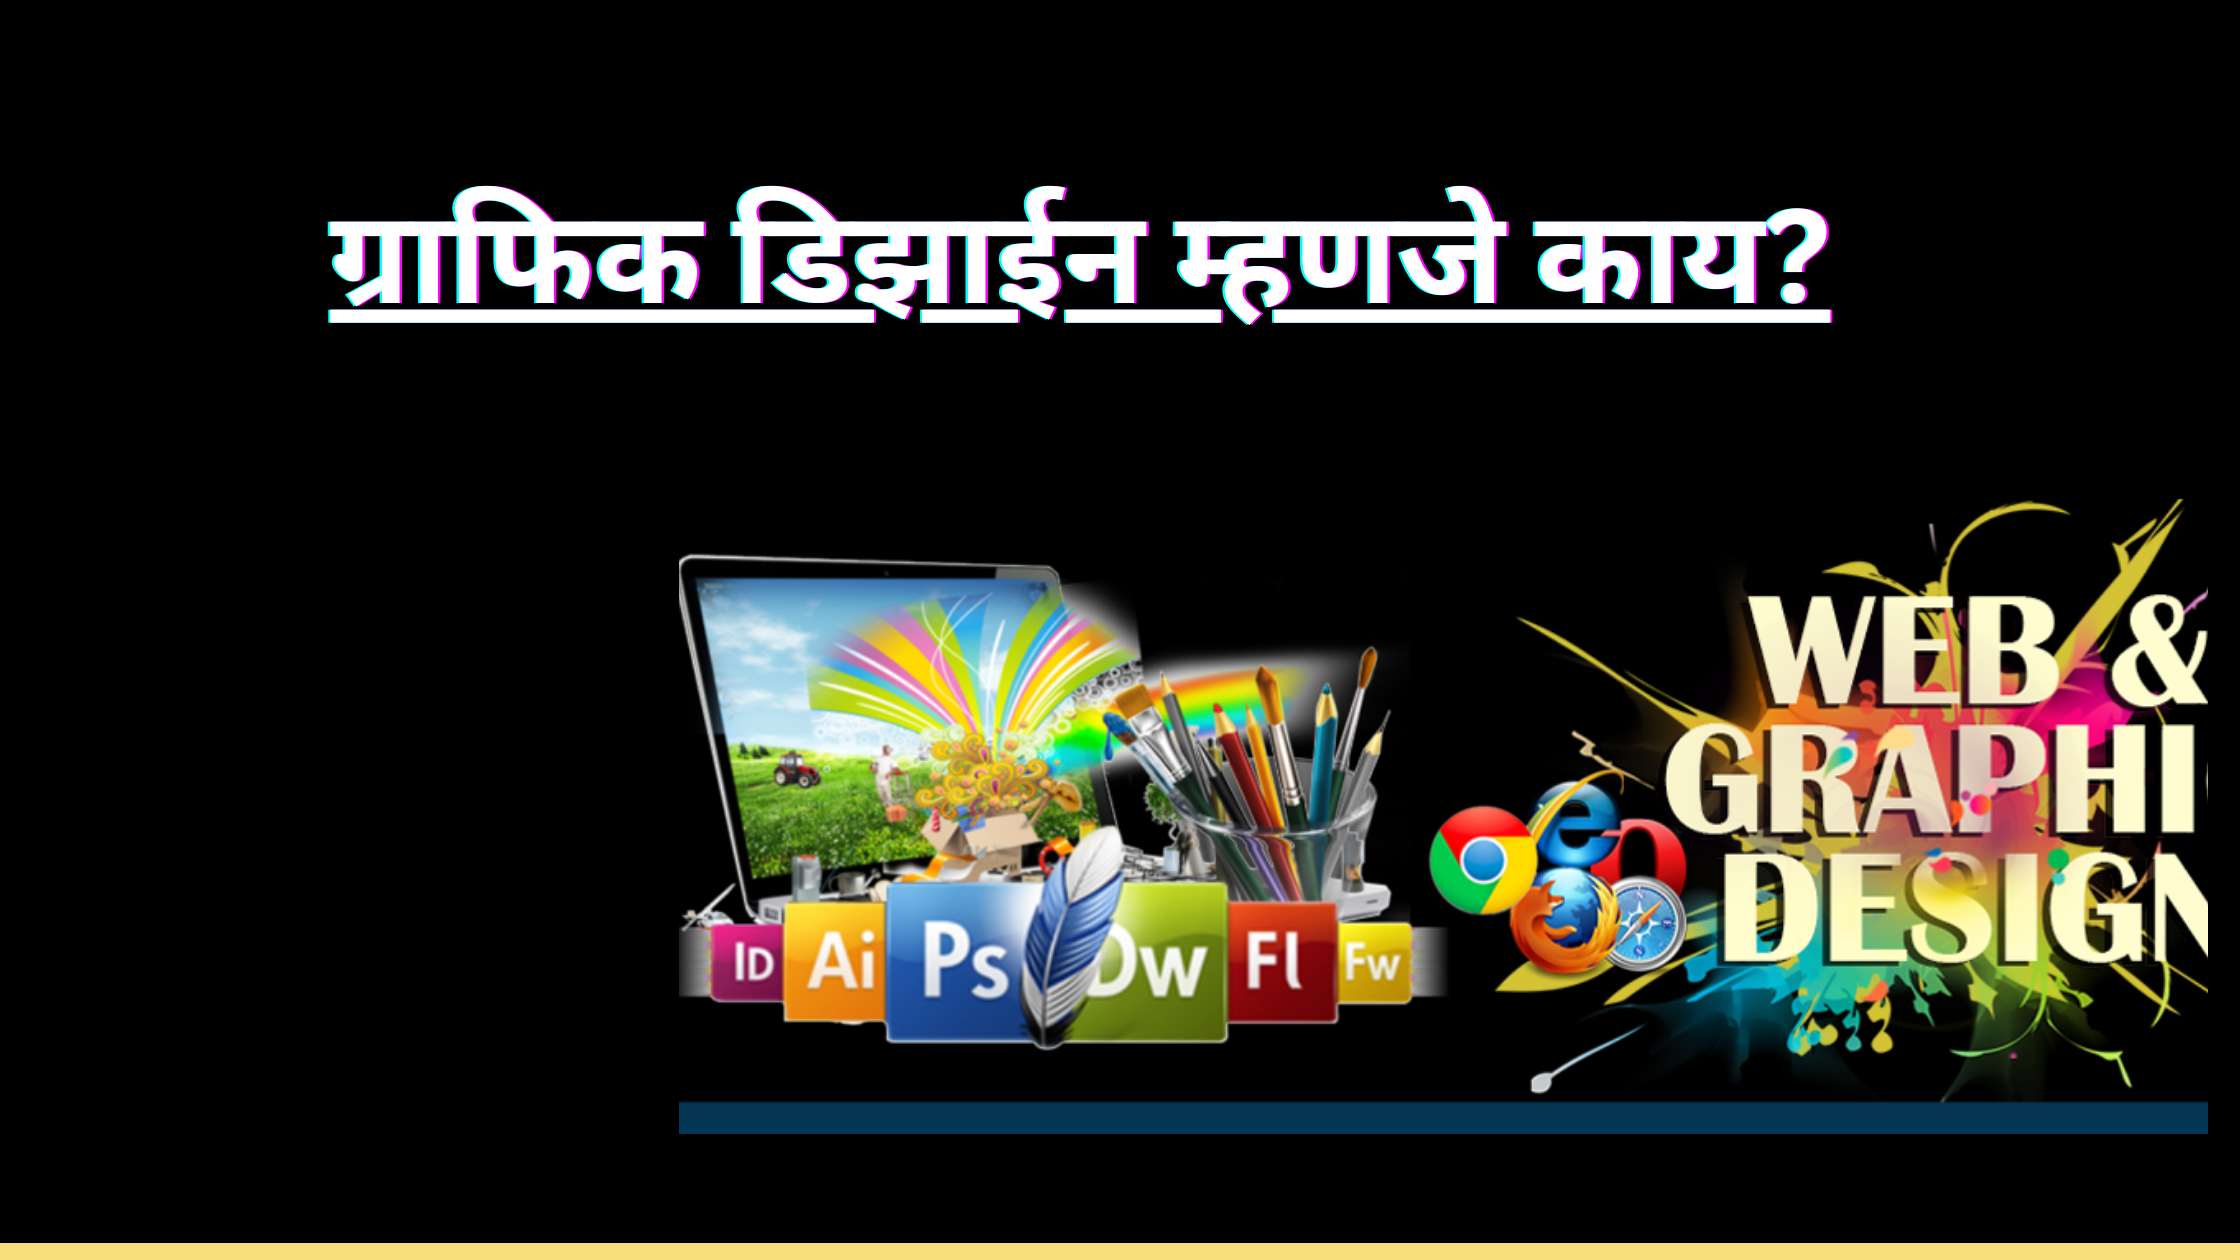 You are currently viewing ग्राफिक डिझाईन म्हणजे काय? 1 लाख/महिना | Graphic Design Meaning In Marathi 